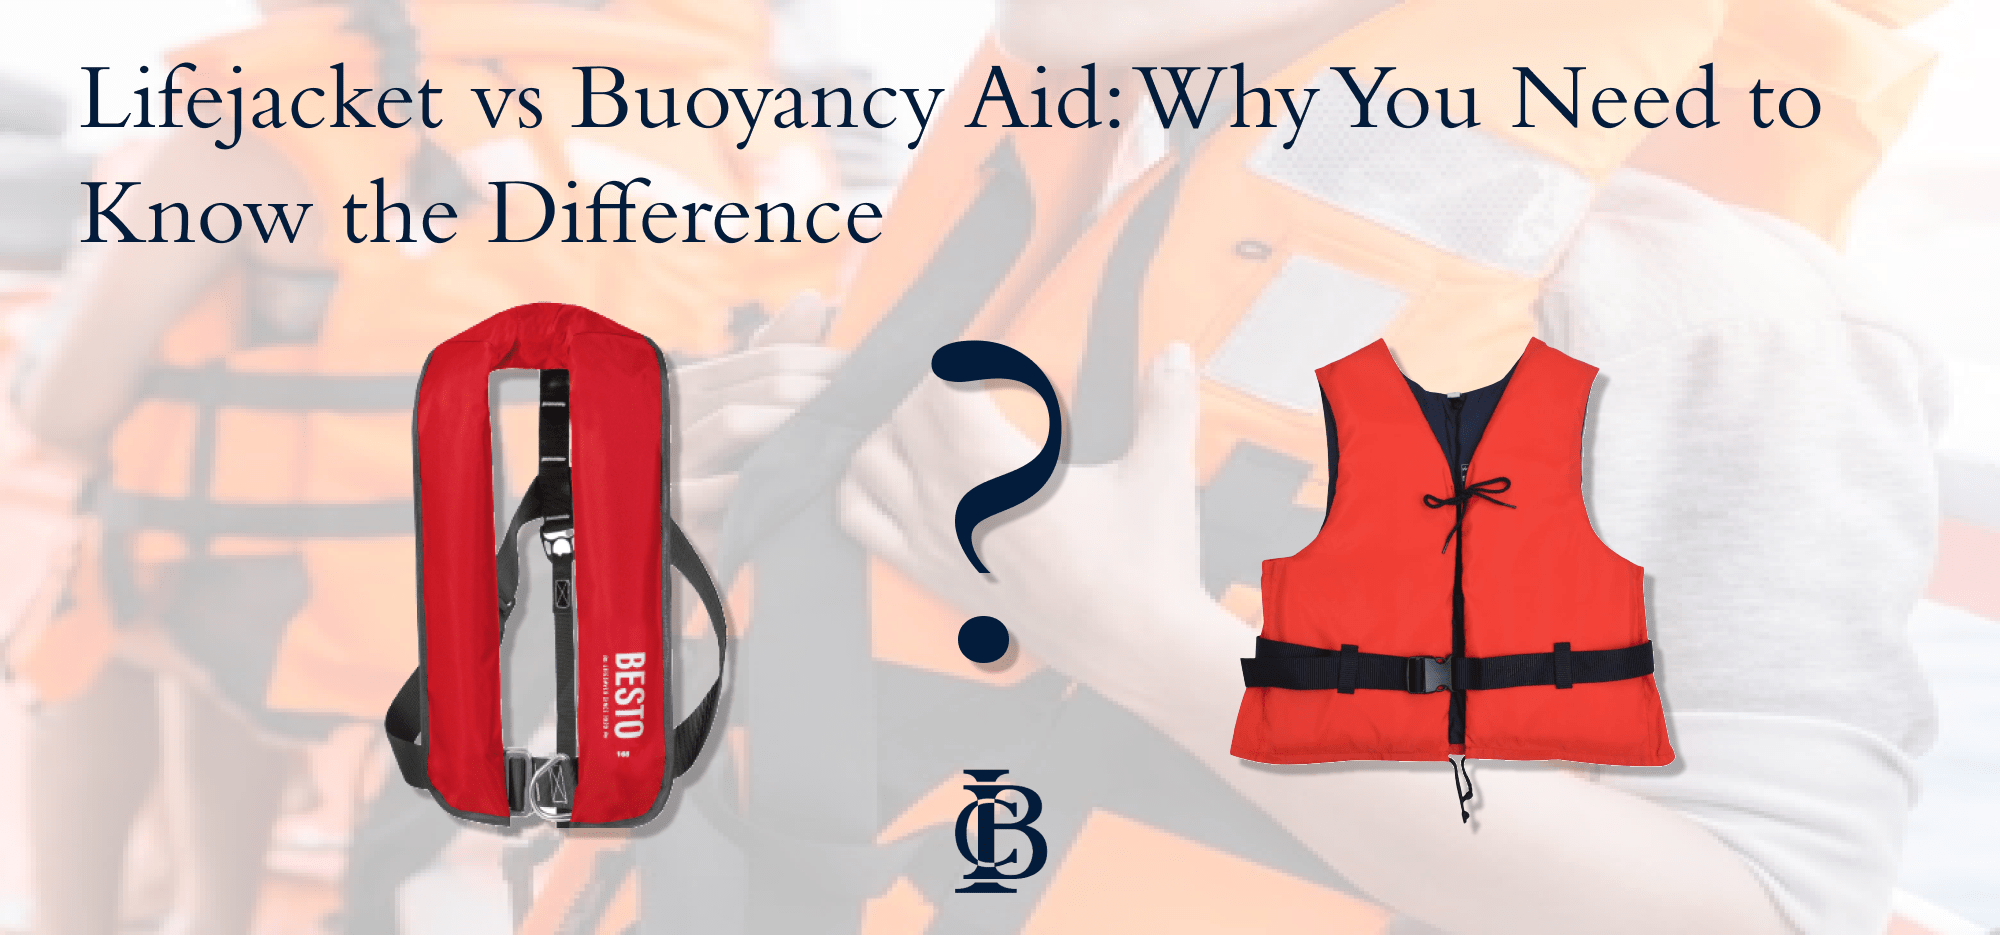 IC Brindle Lifejacket vs Buoyancy Aid - Why You Should Know the Difference